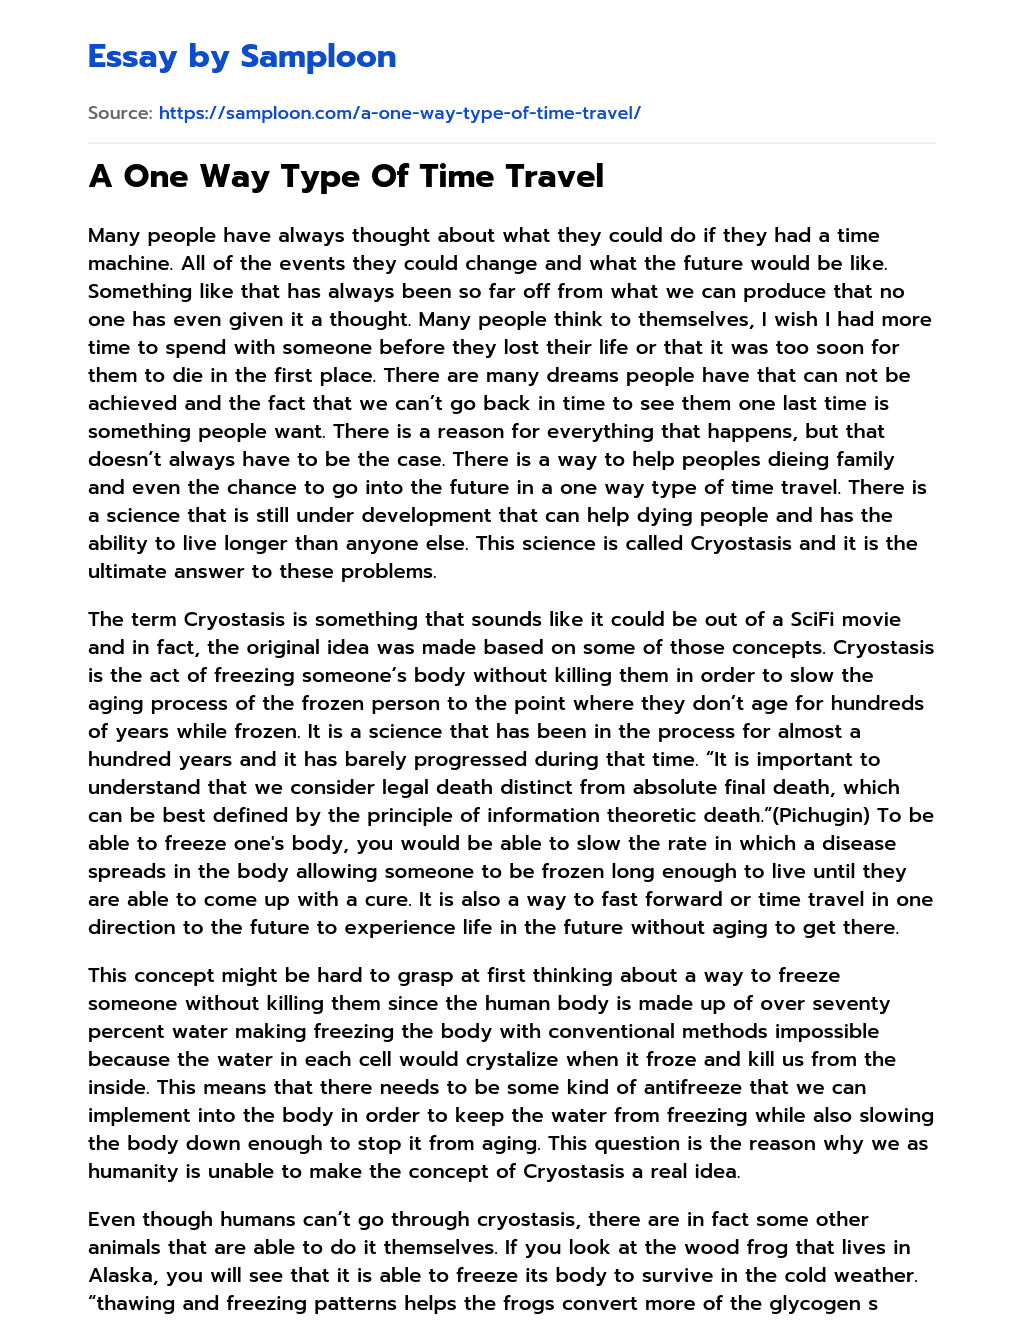 A One Way Type Of Time Travel essay